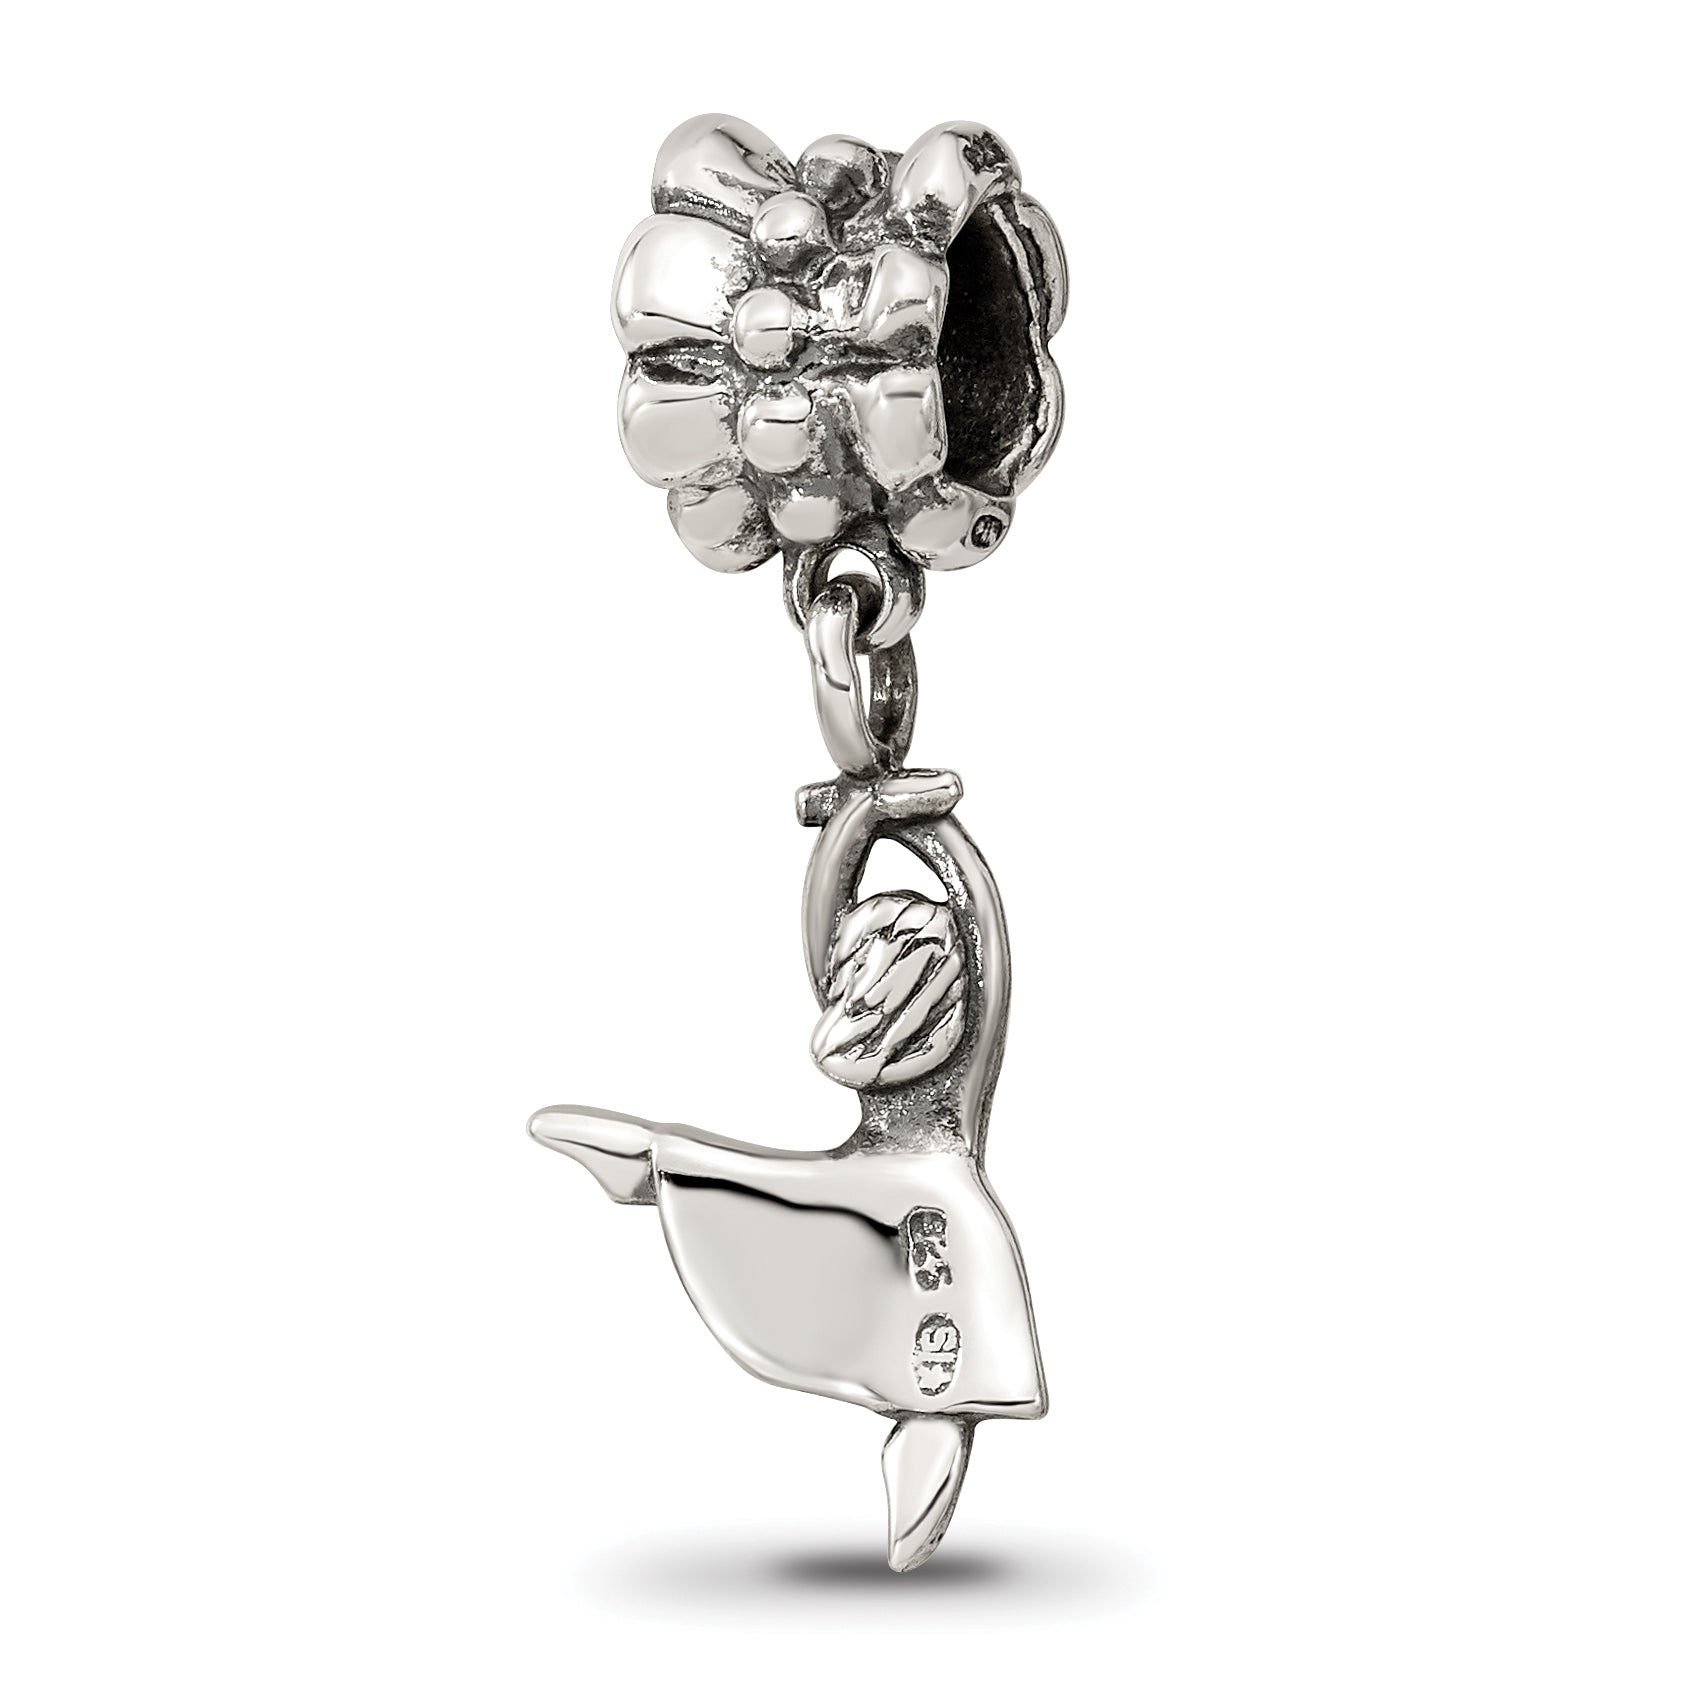 Sterling Silver Reflections Dancer Dangle Bead